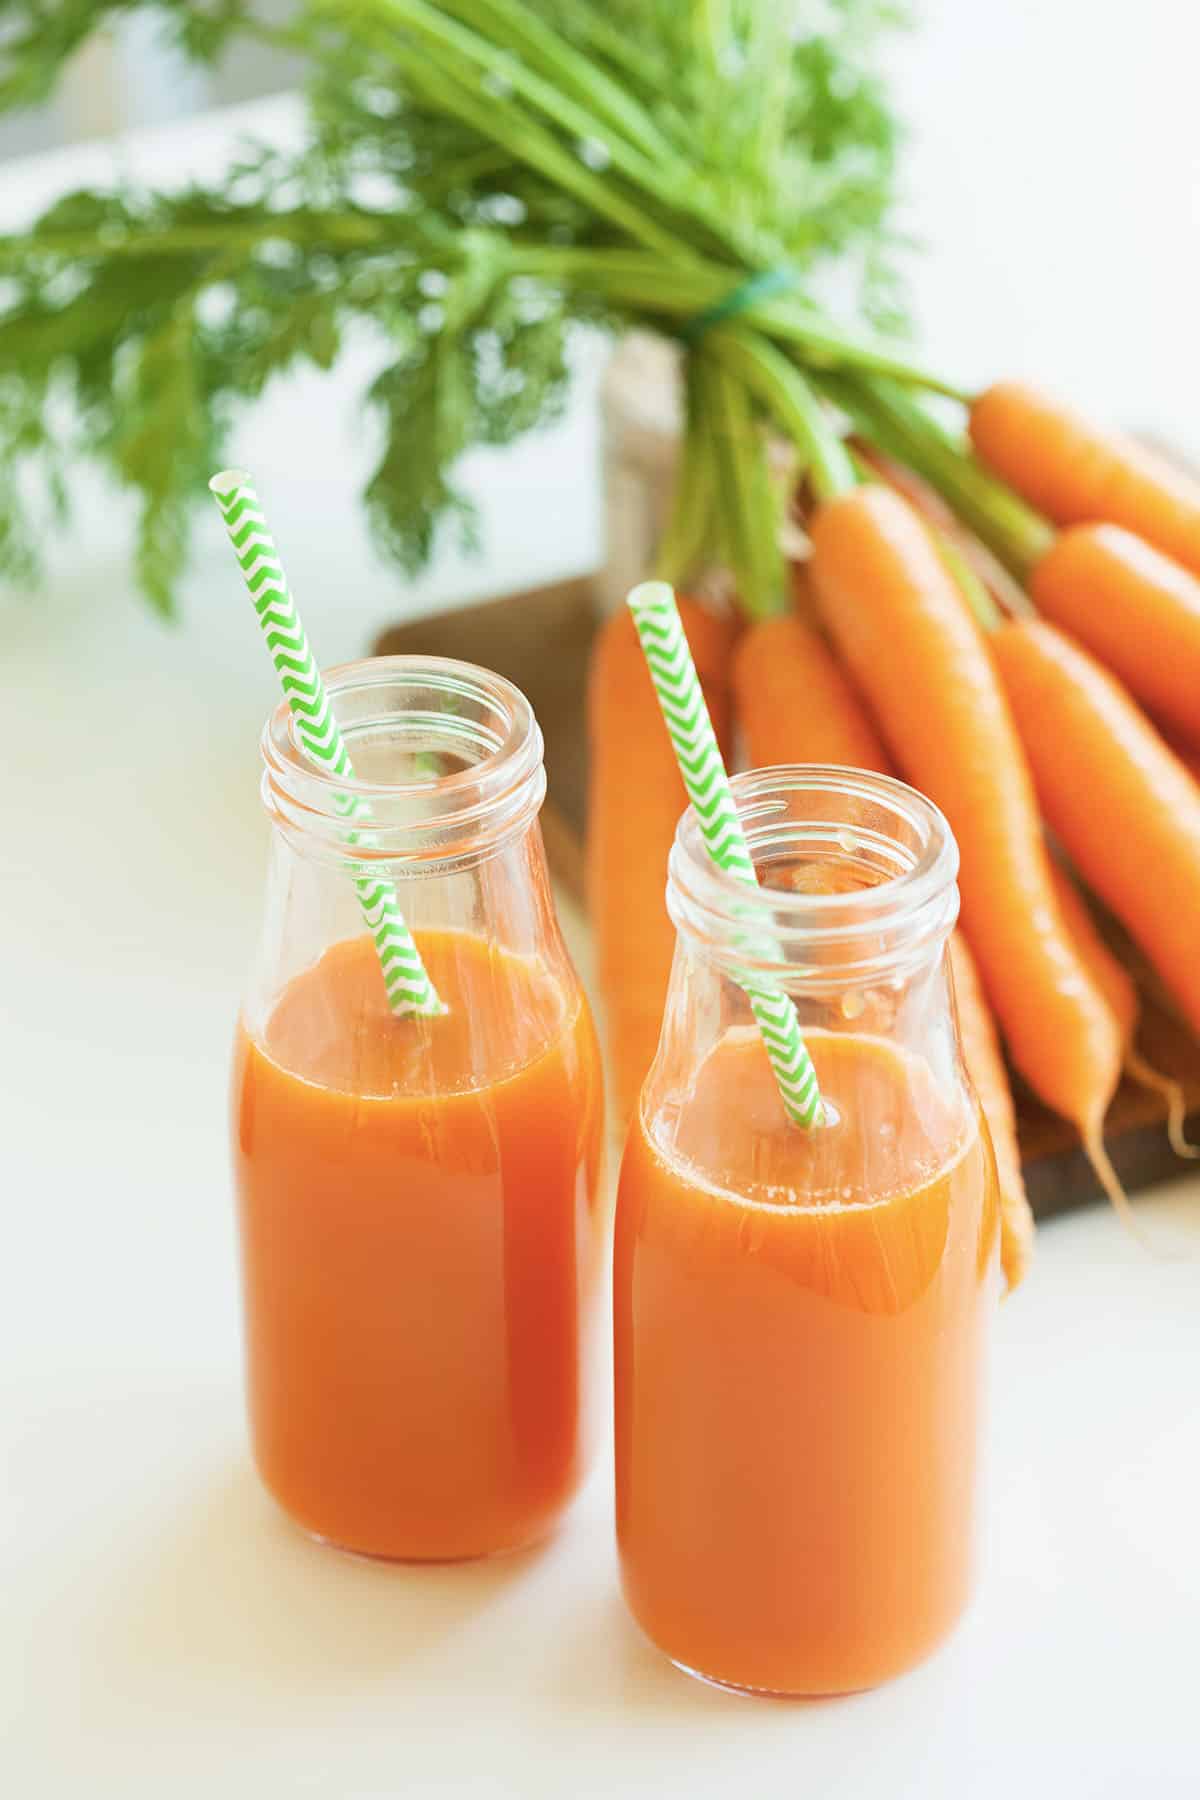 fresh carrot juice and fresh carrots in the background with green striped straws